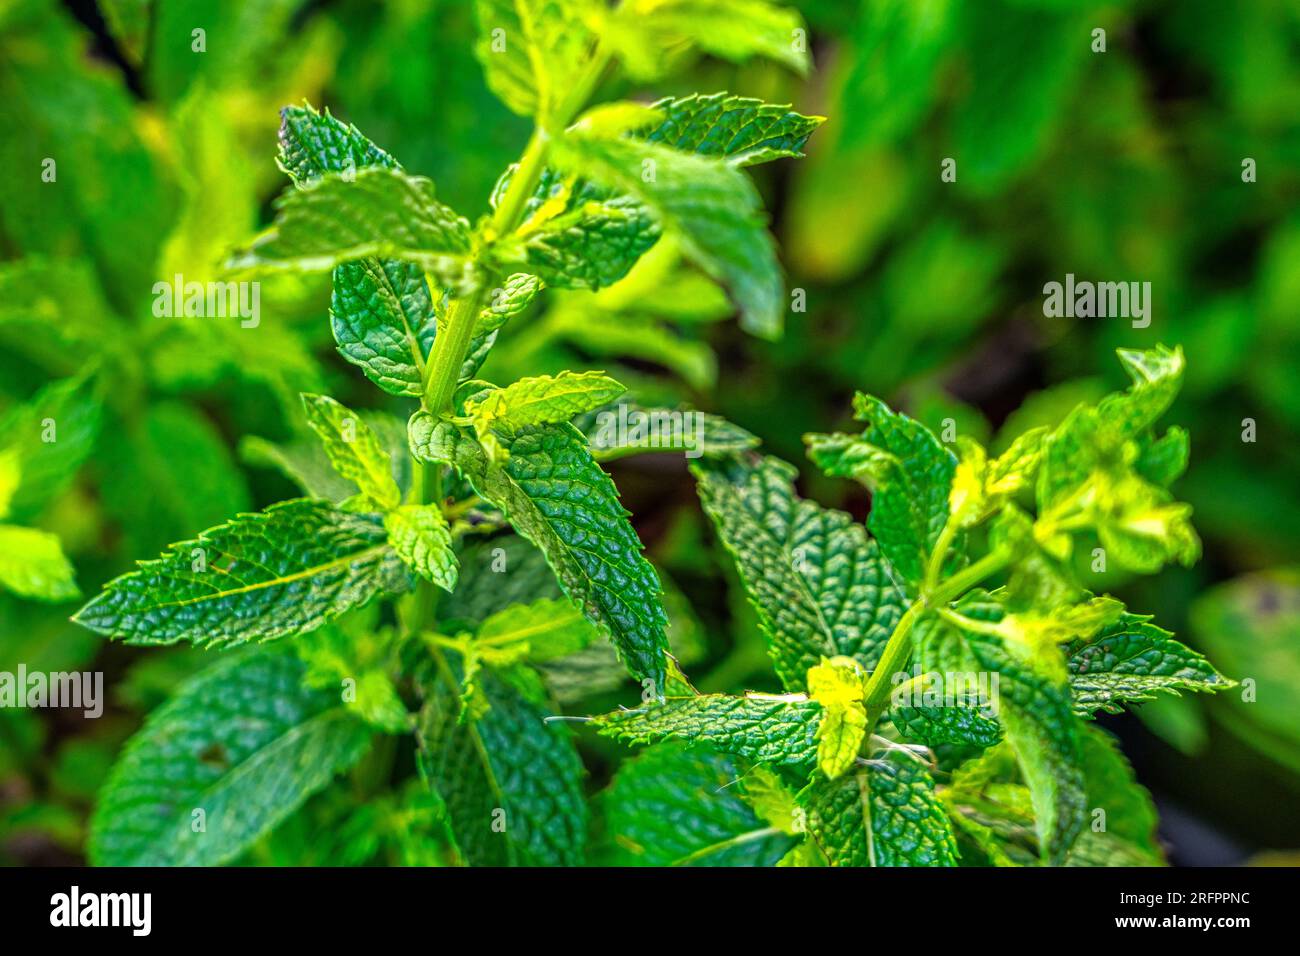 Fresh mint leaf on green background. Mentha spicata is an aromatic herb belonging to the Lamiaceae family at the farmer's market Stock Photo